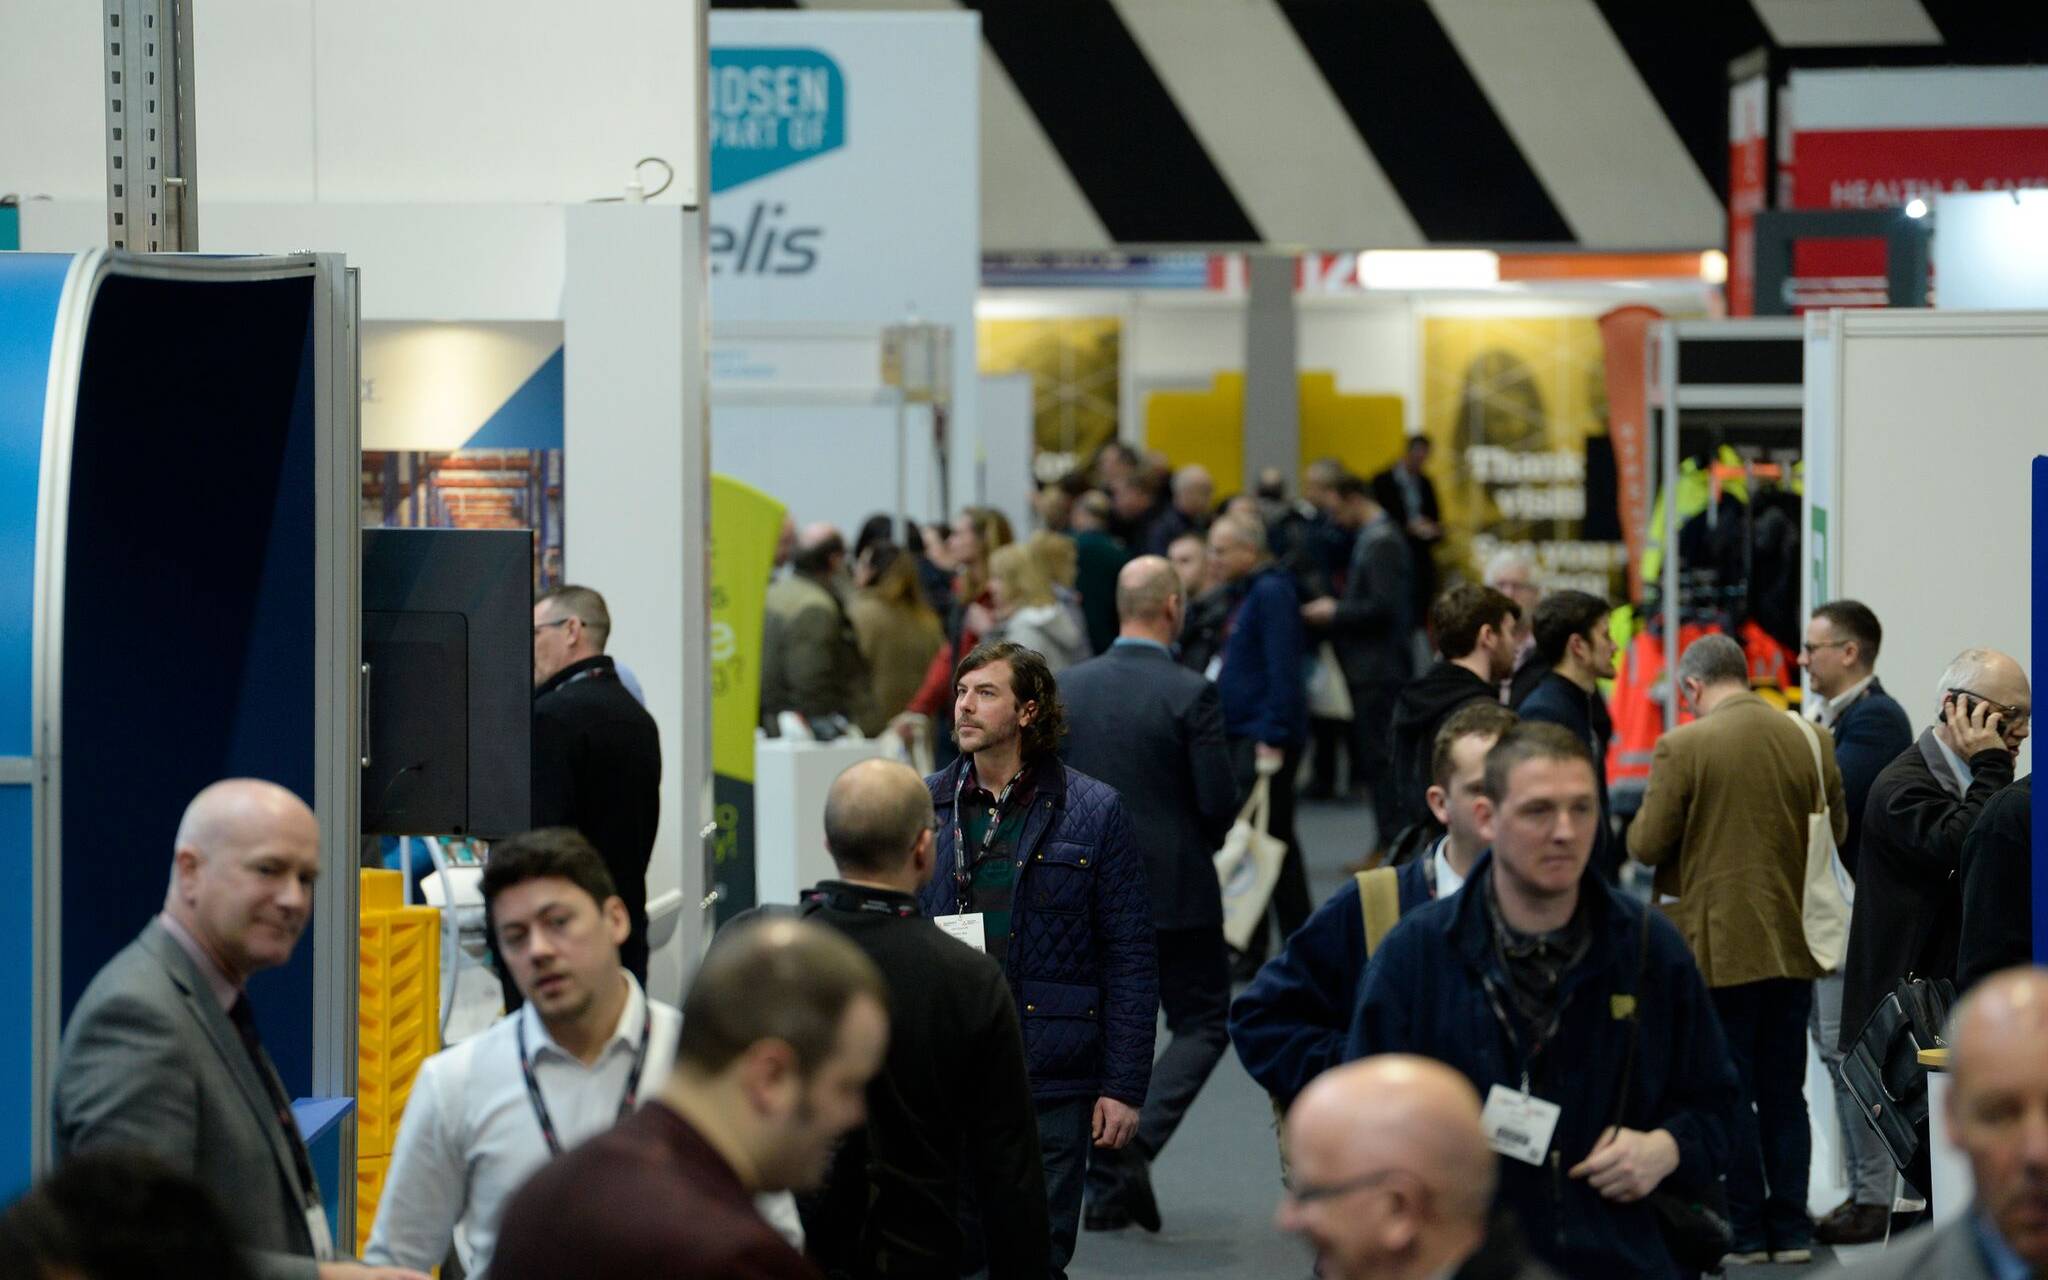 The Security Event rescheduled until the 22nd September 2020 at the NEC